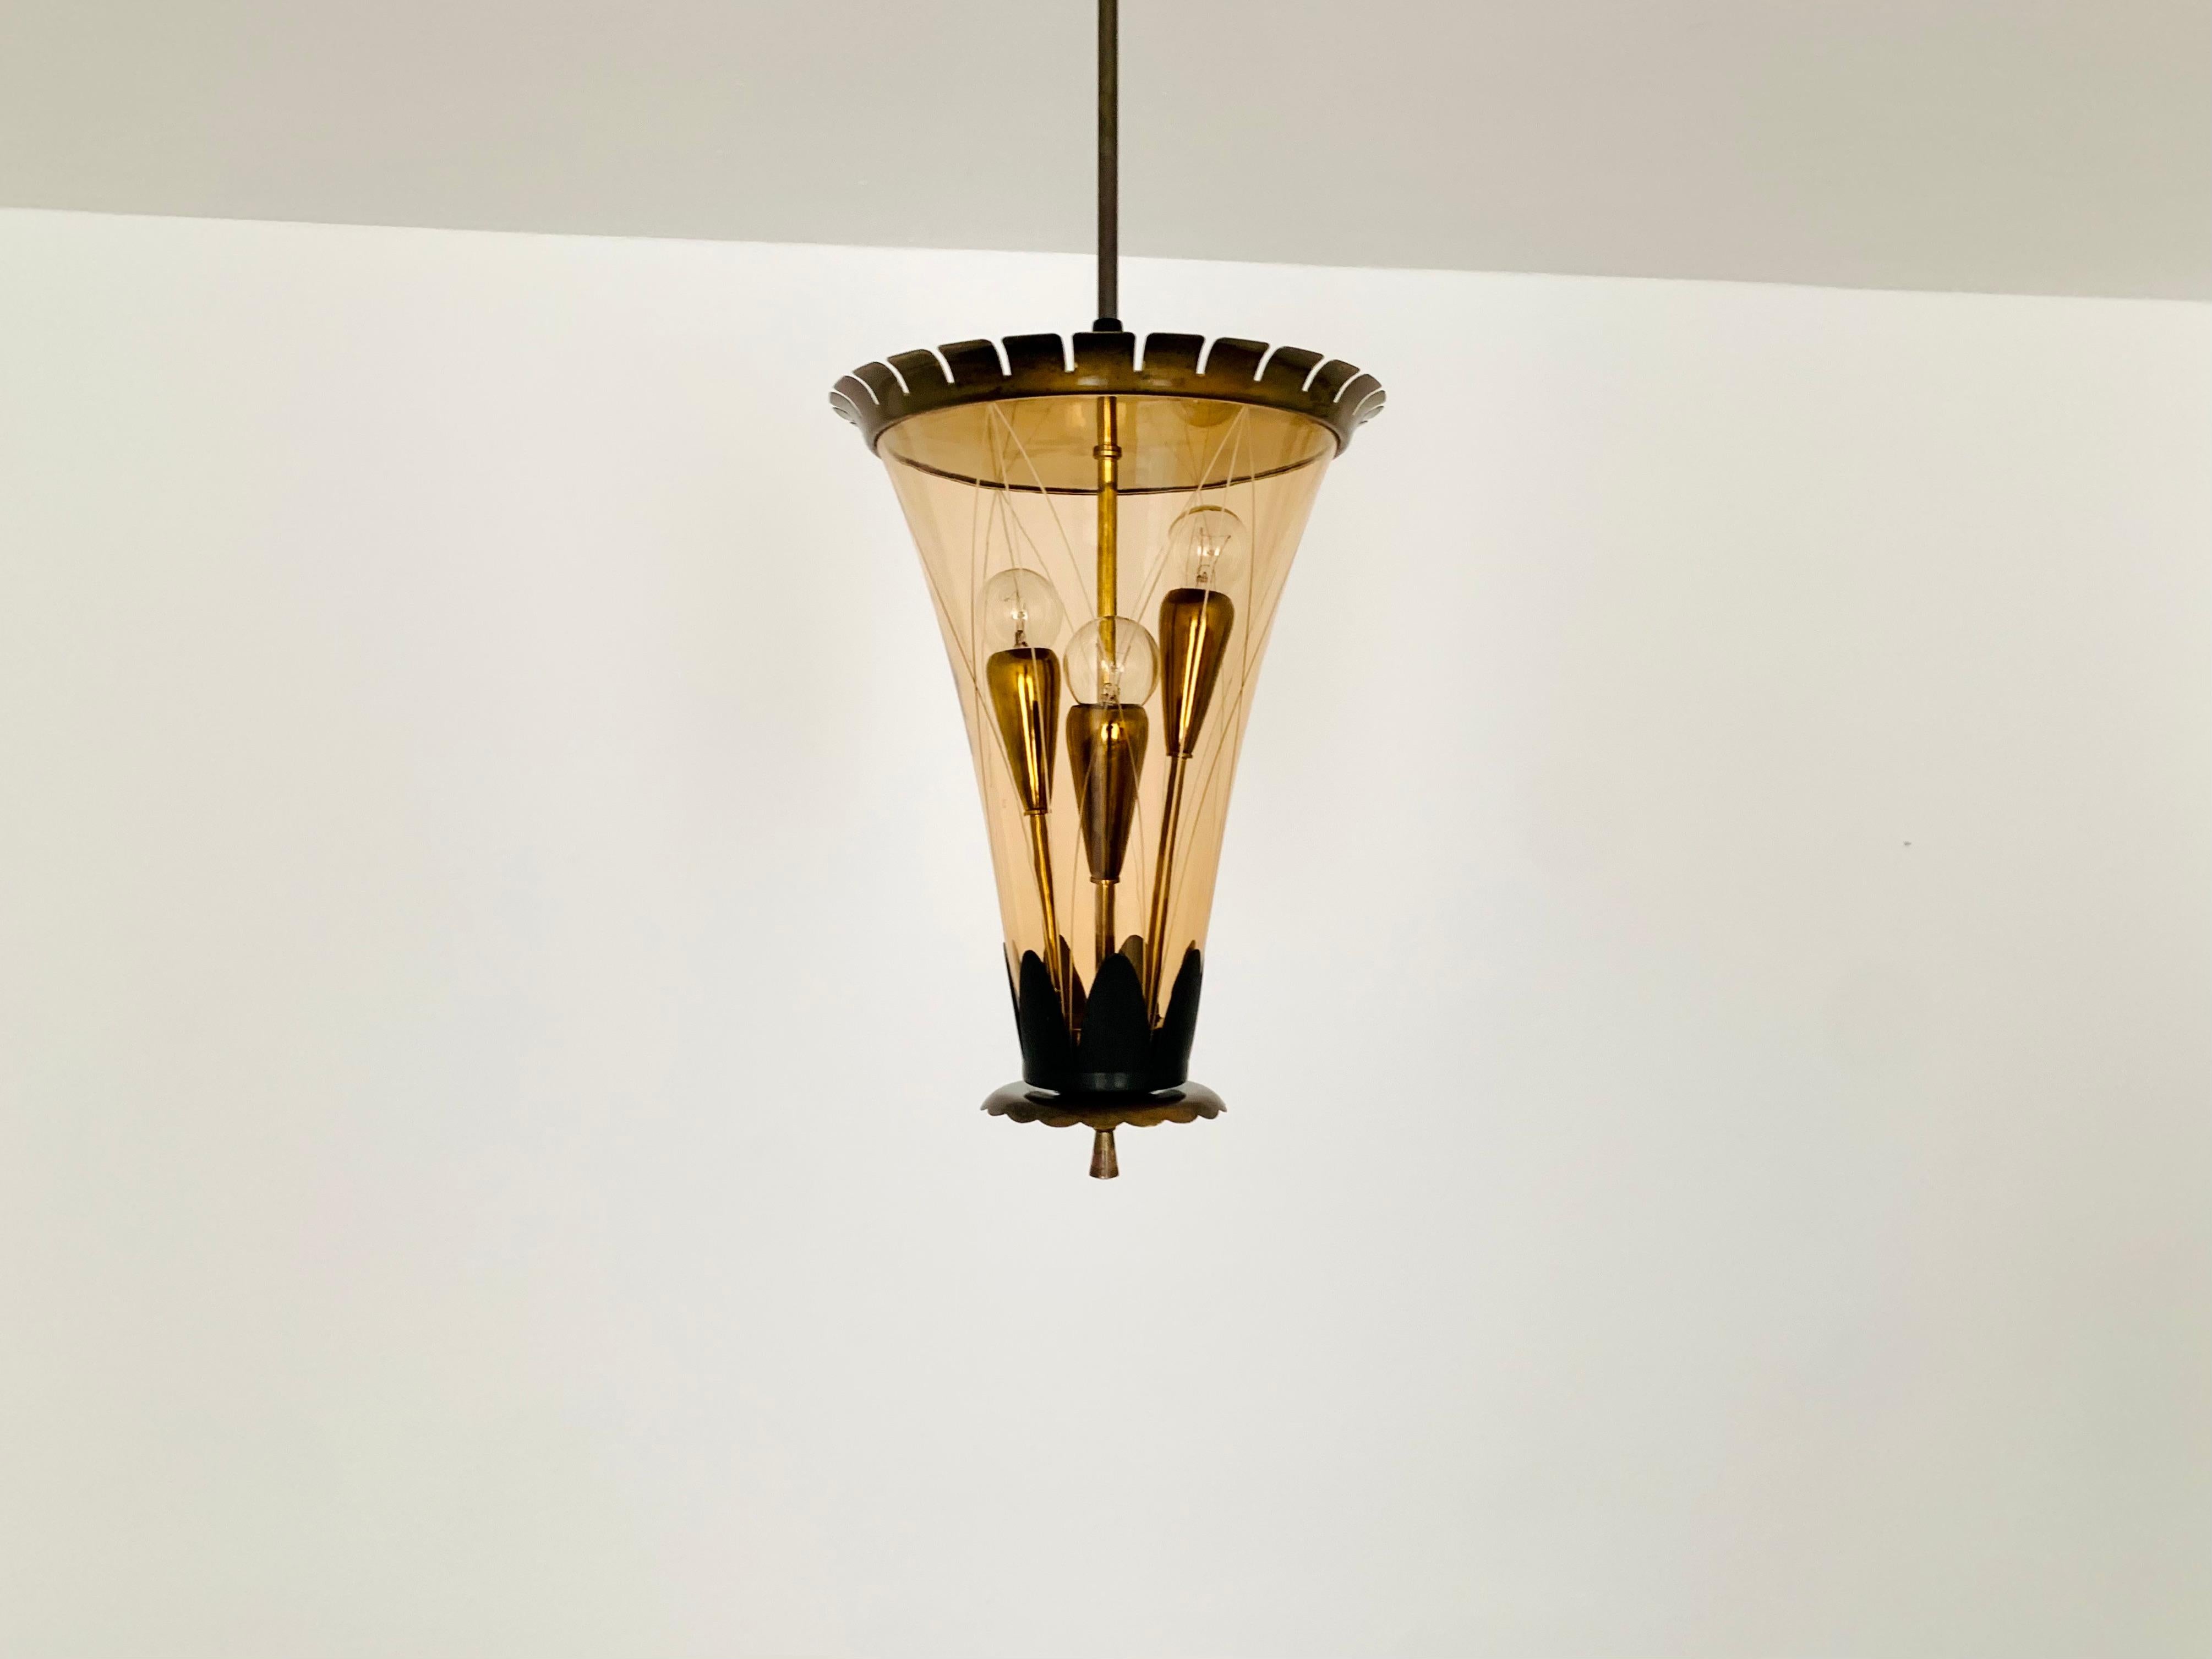 Exceptionally decorative Italian ceiling lamp from the 1950s.
Very detailed and high-quality processed.
Wonderful design and an asset to any home.
A wonderful play of light is created.

Condition:

Very good vintage condition with slight